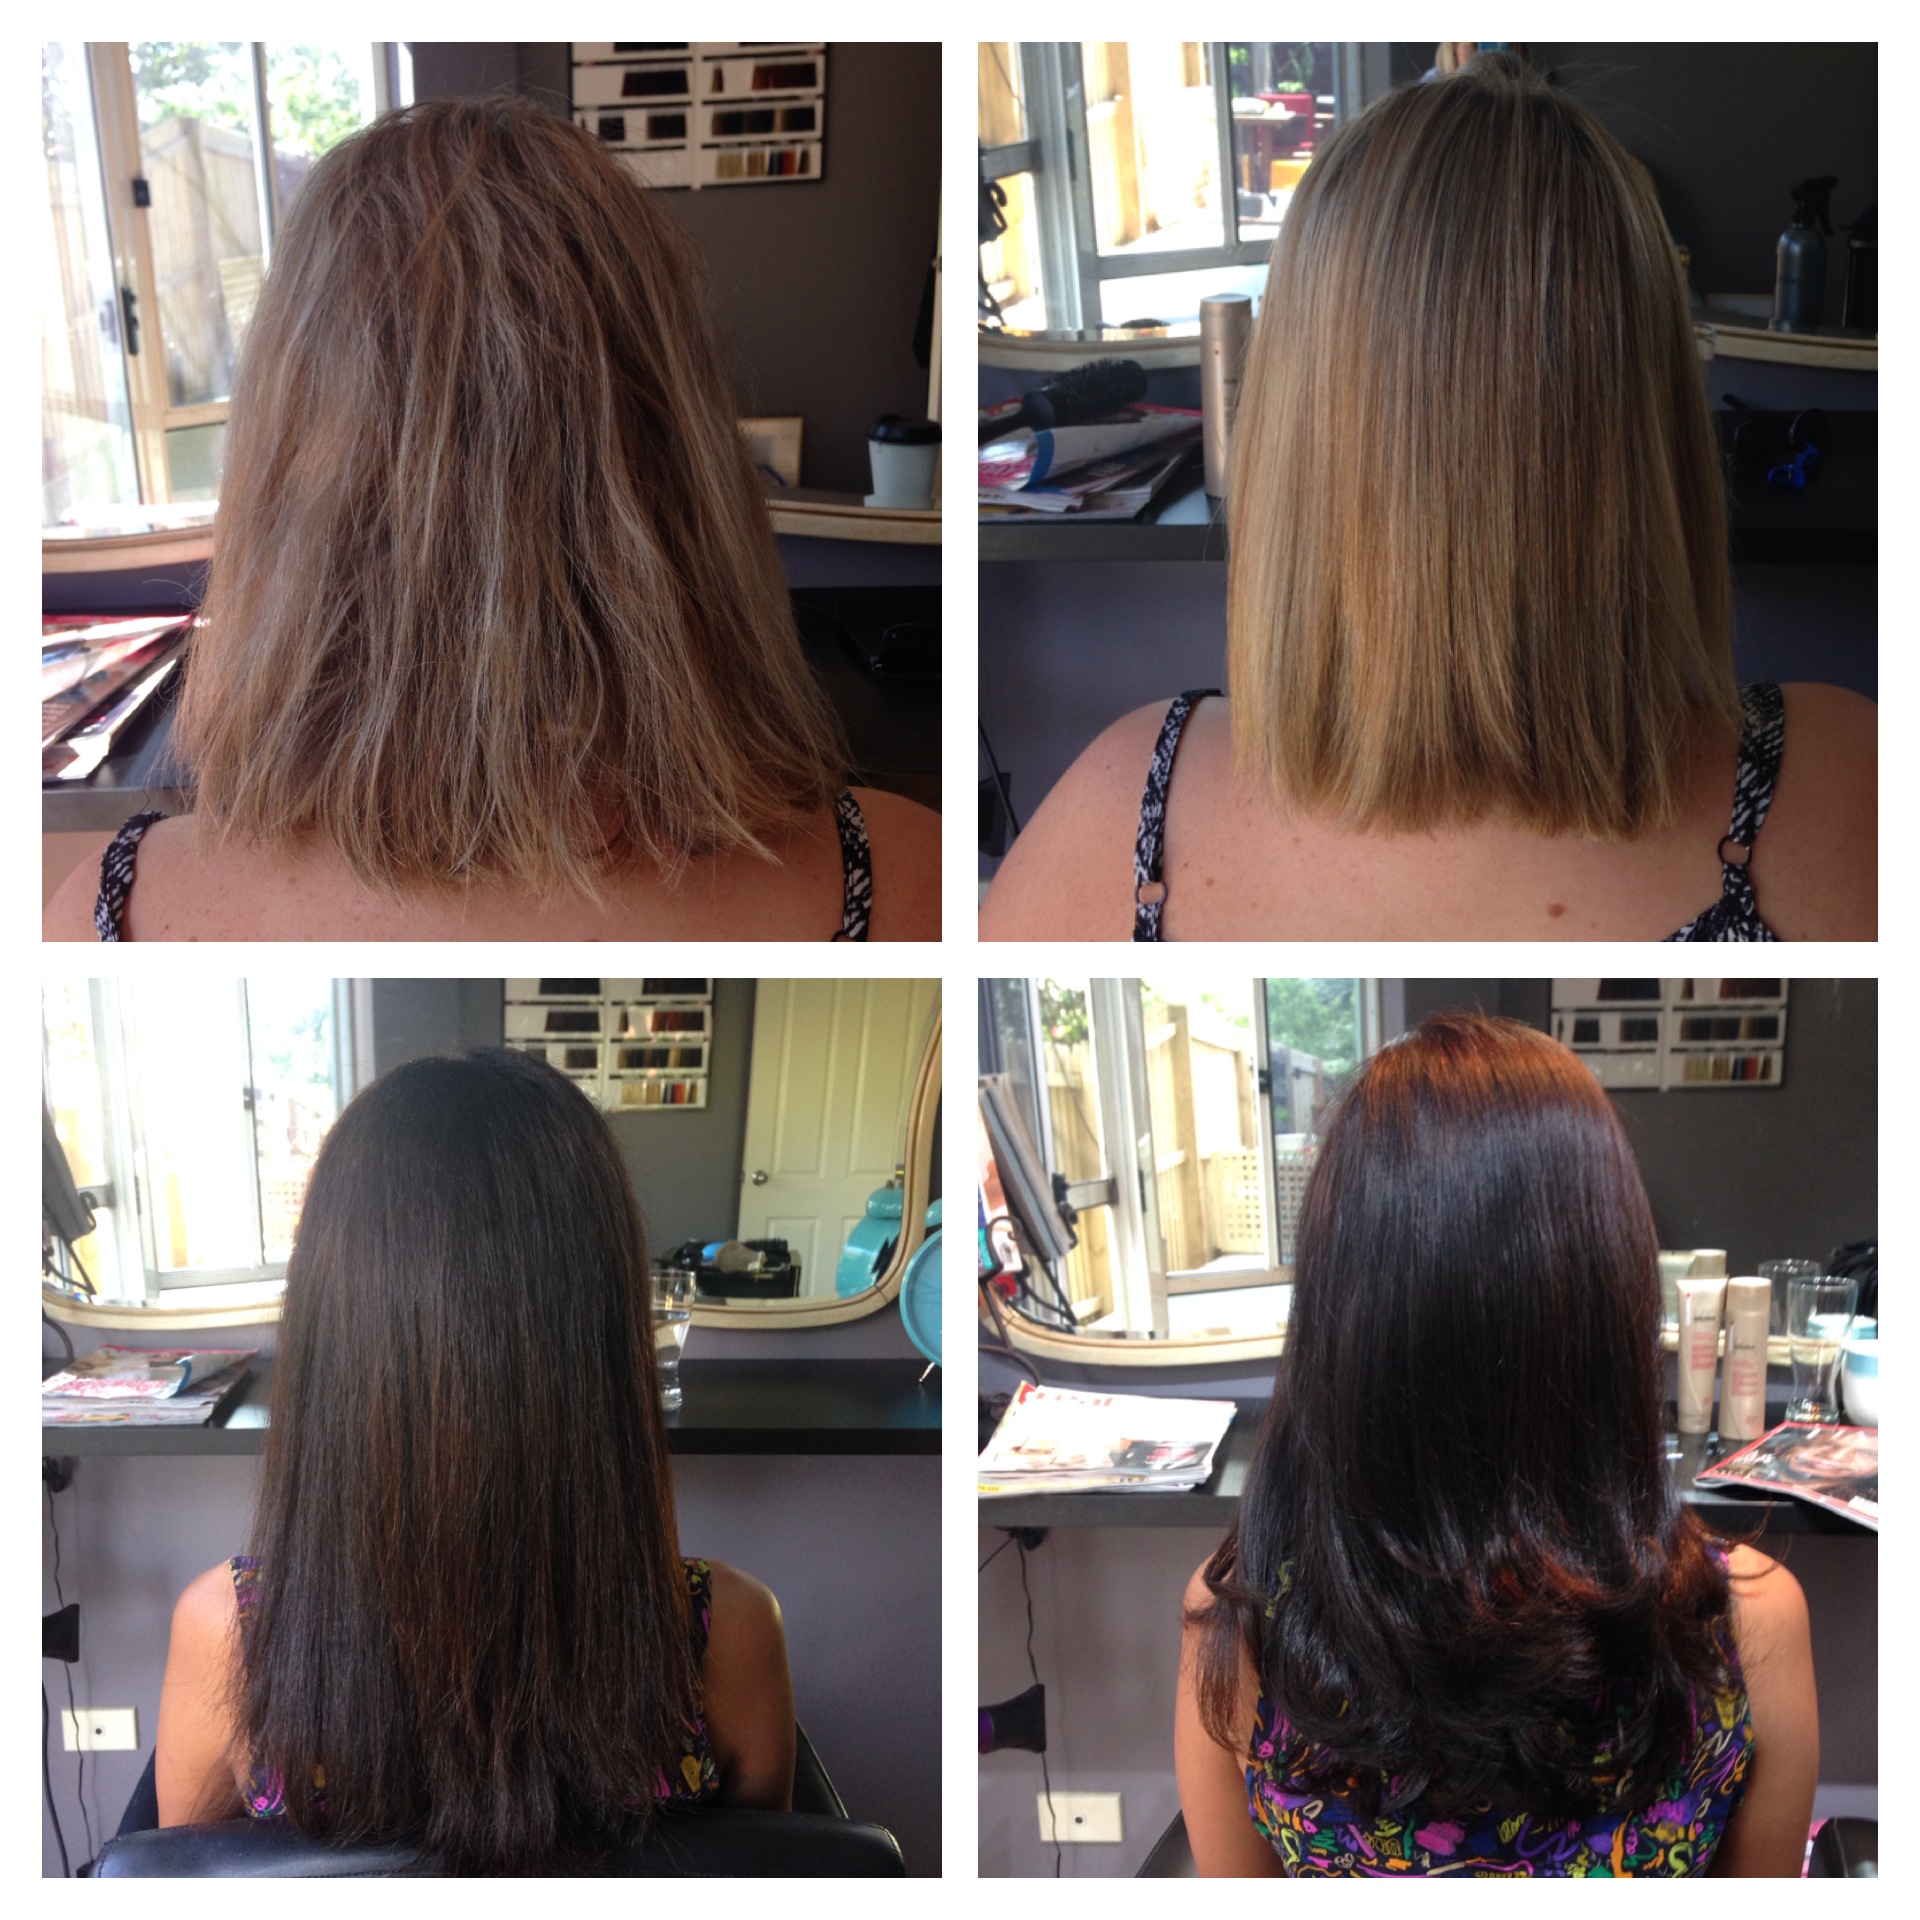 Keratin Smoothing Treatment results